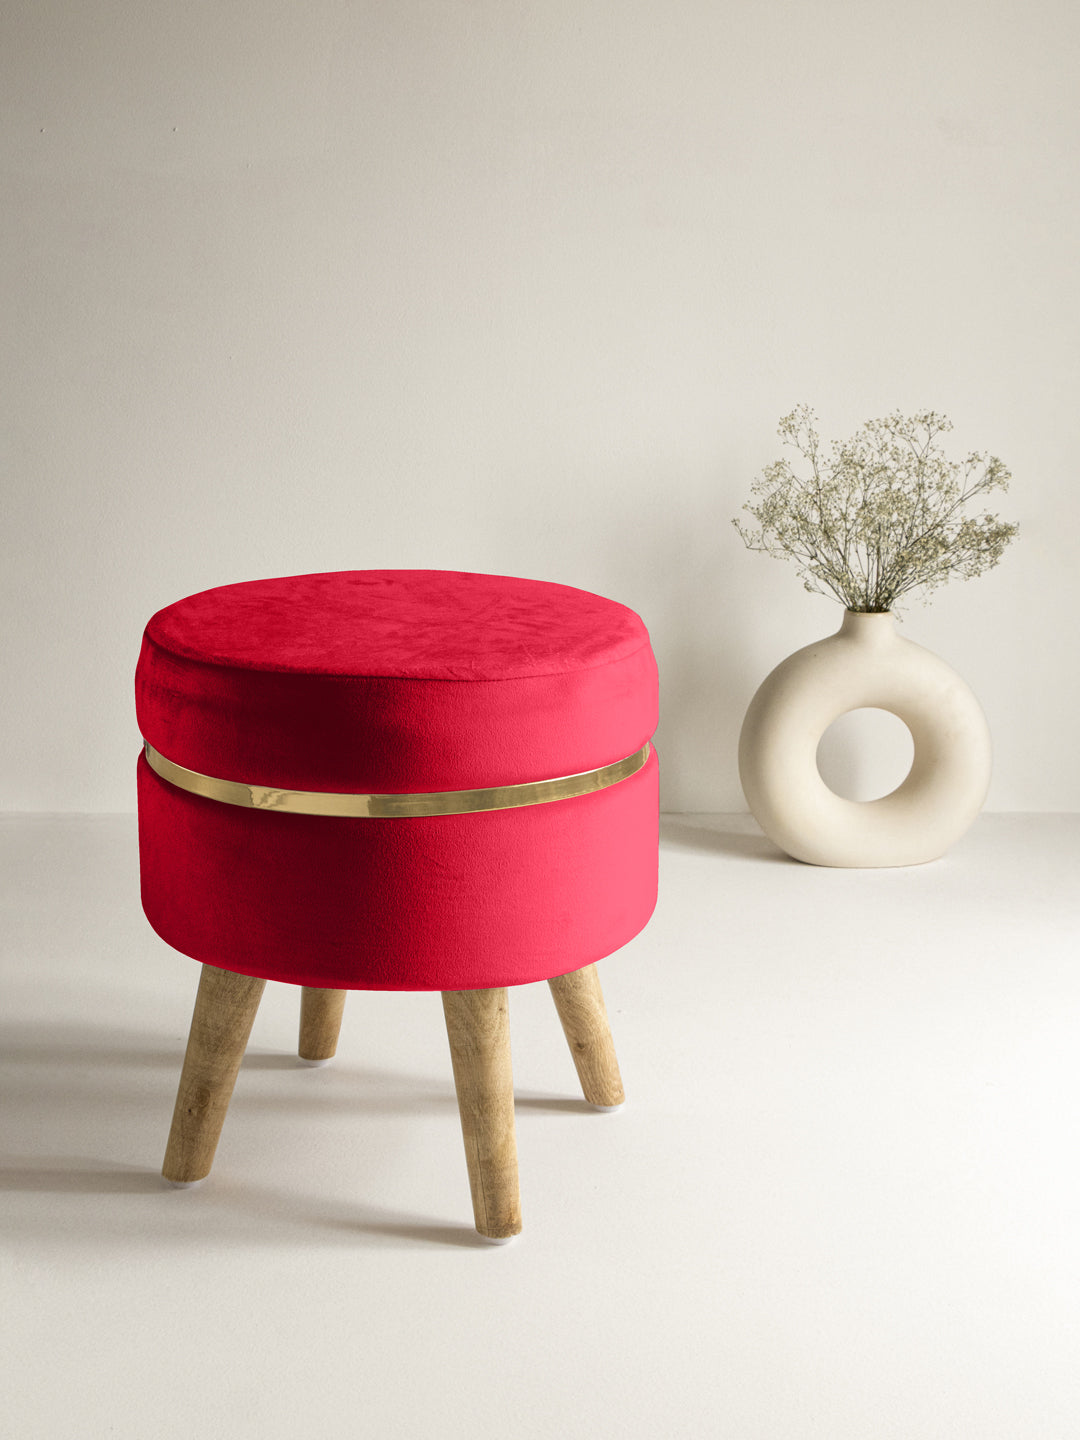 Suede Crismon Red Stool With Golden Ring & Wood Legs